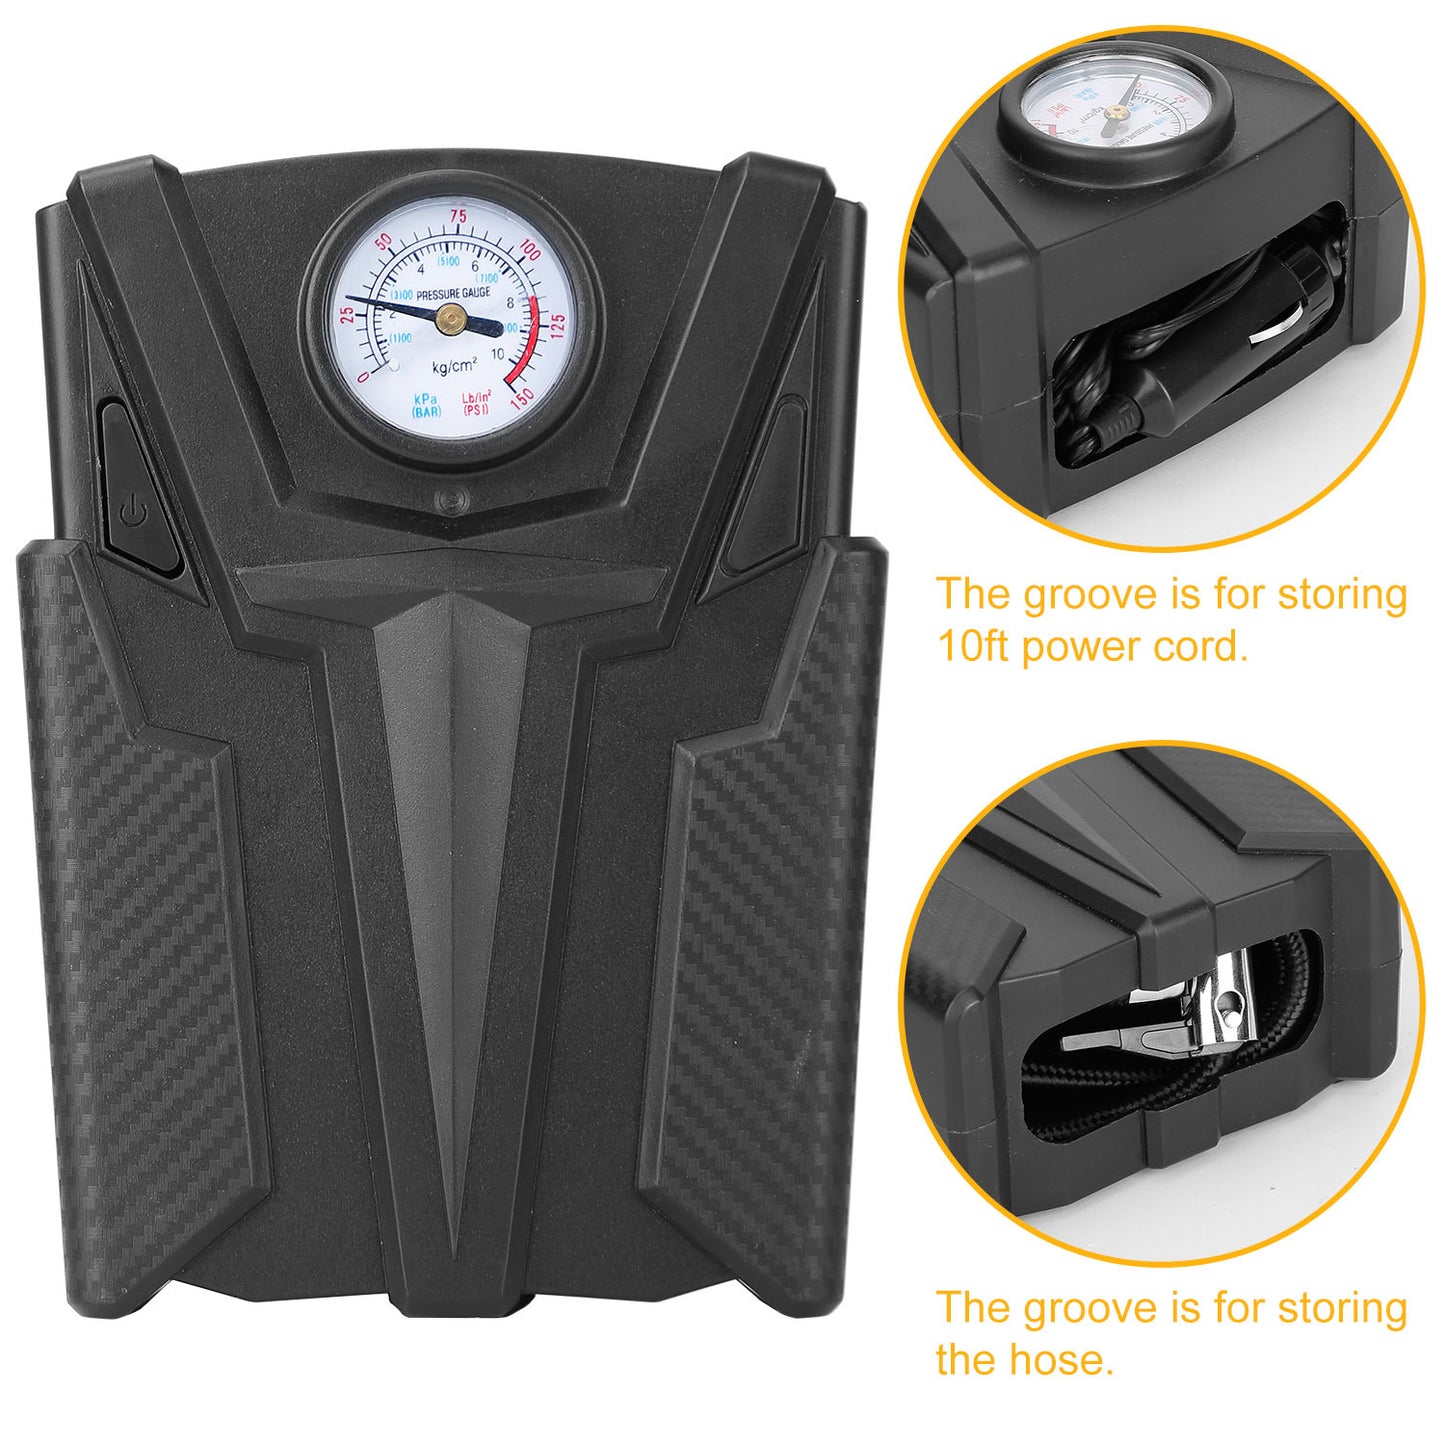 Car Tire Air Pump Portable Air Compressor Pump DC 12V Car Tire Inflator Pump For Bicycle Motorcycle w/ Pointer